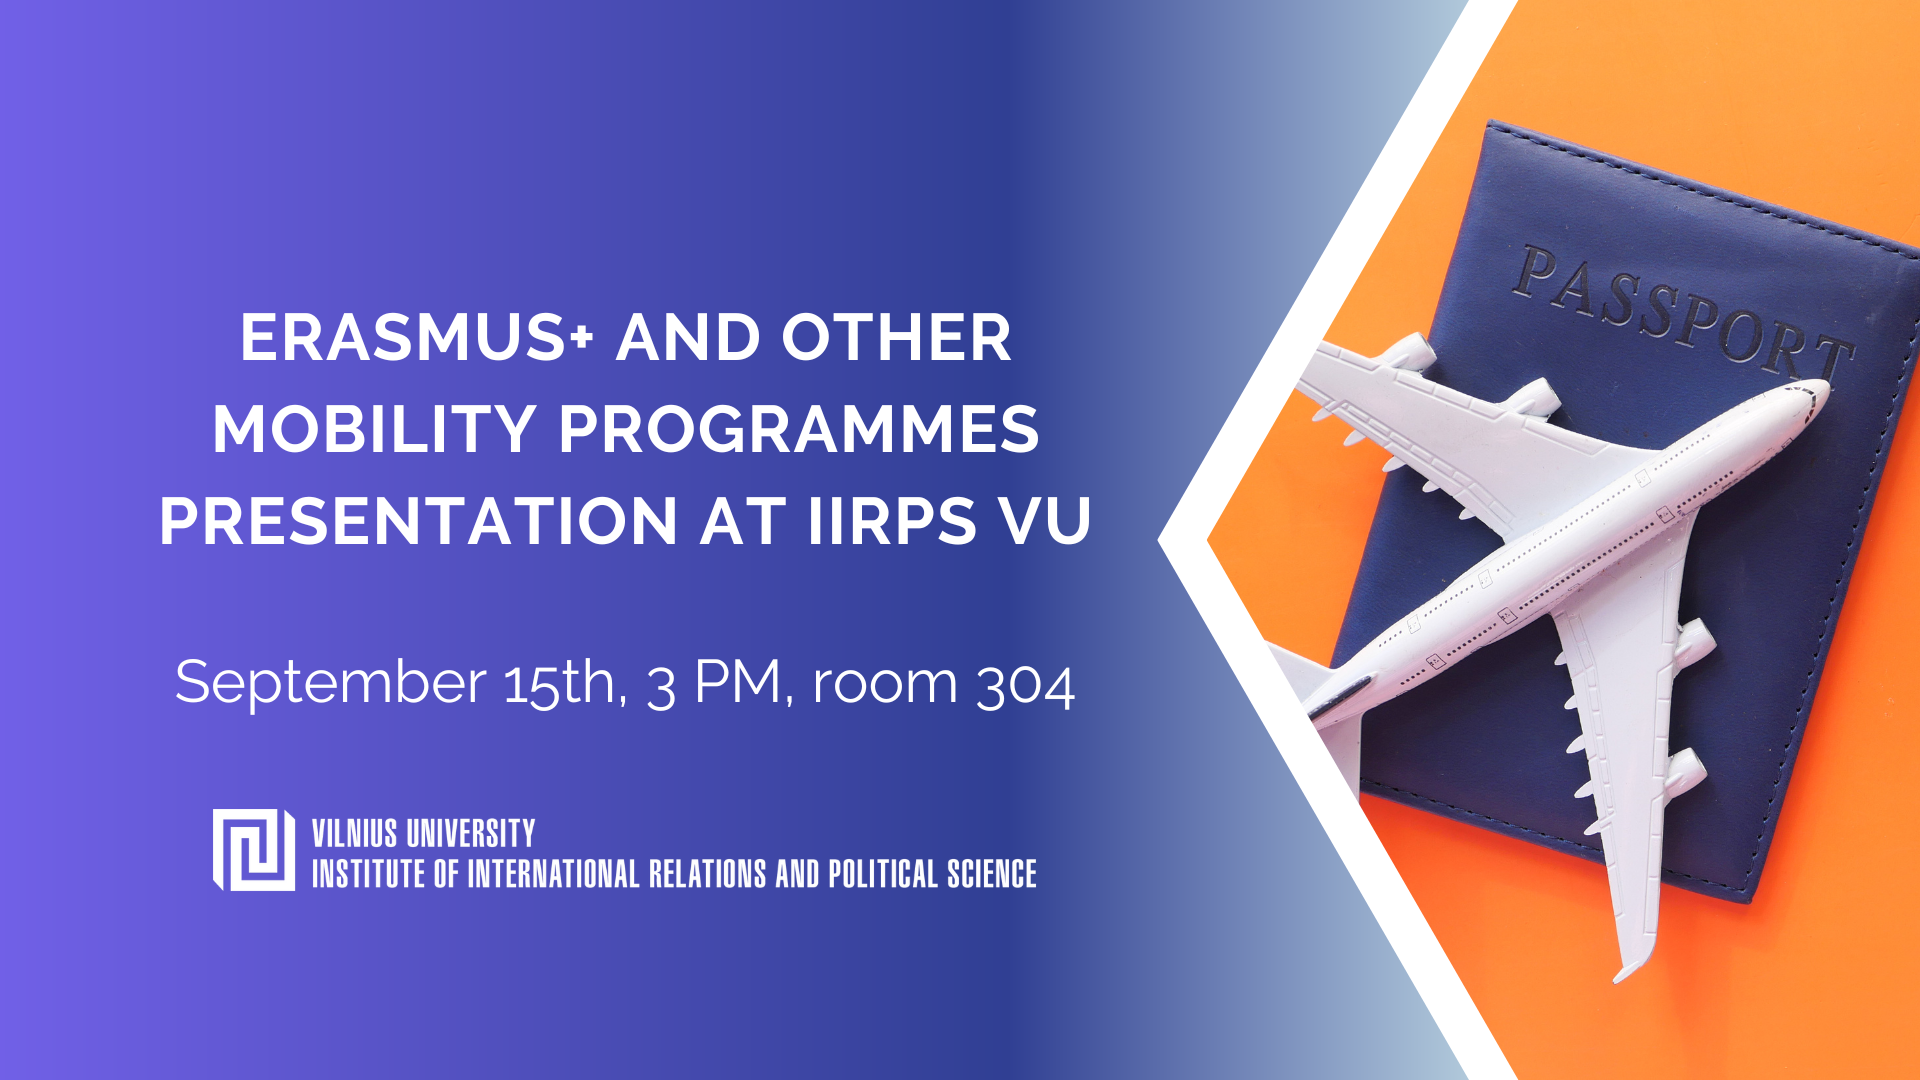 Erasmus+ and other mobility programmes presentation at IIRPS VU